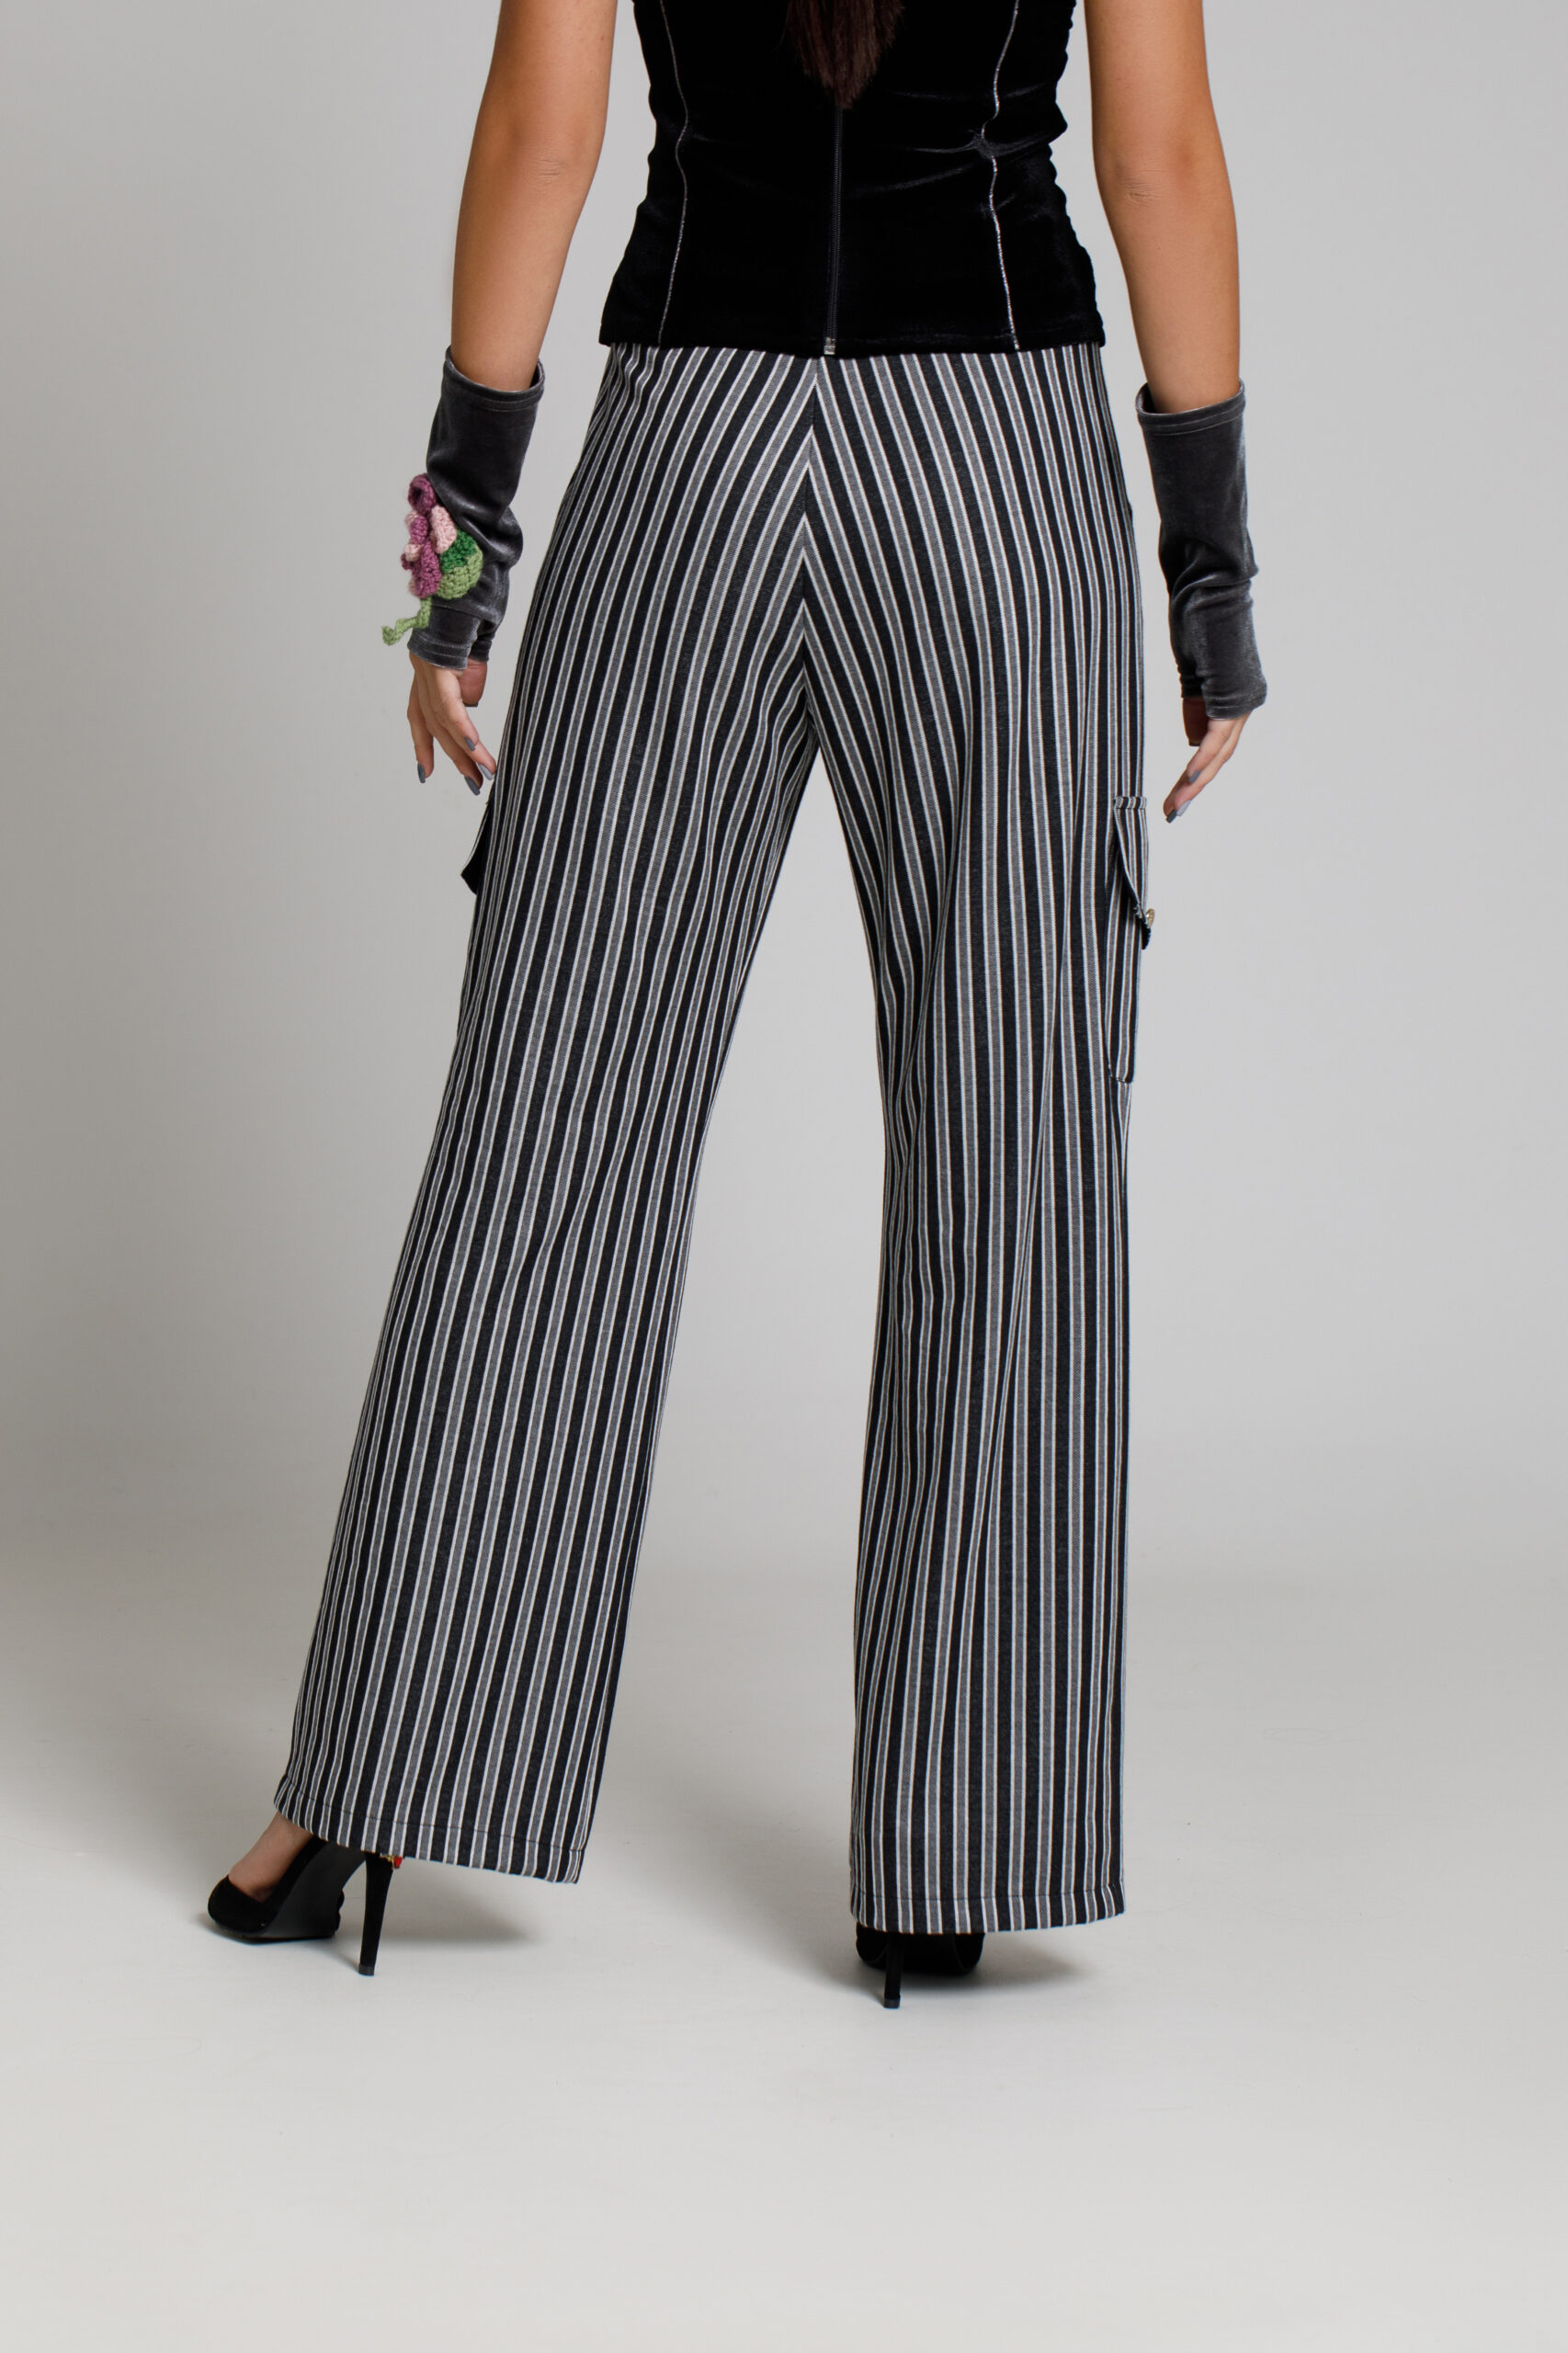 ROWAN trousers in black and white stripes. Natural fabrics, original design, handmade embroidery